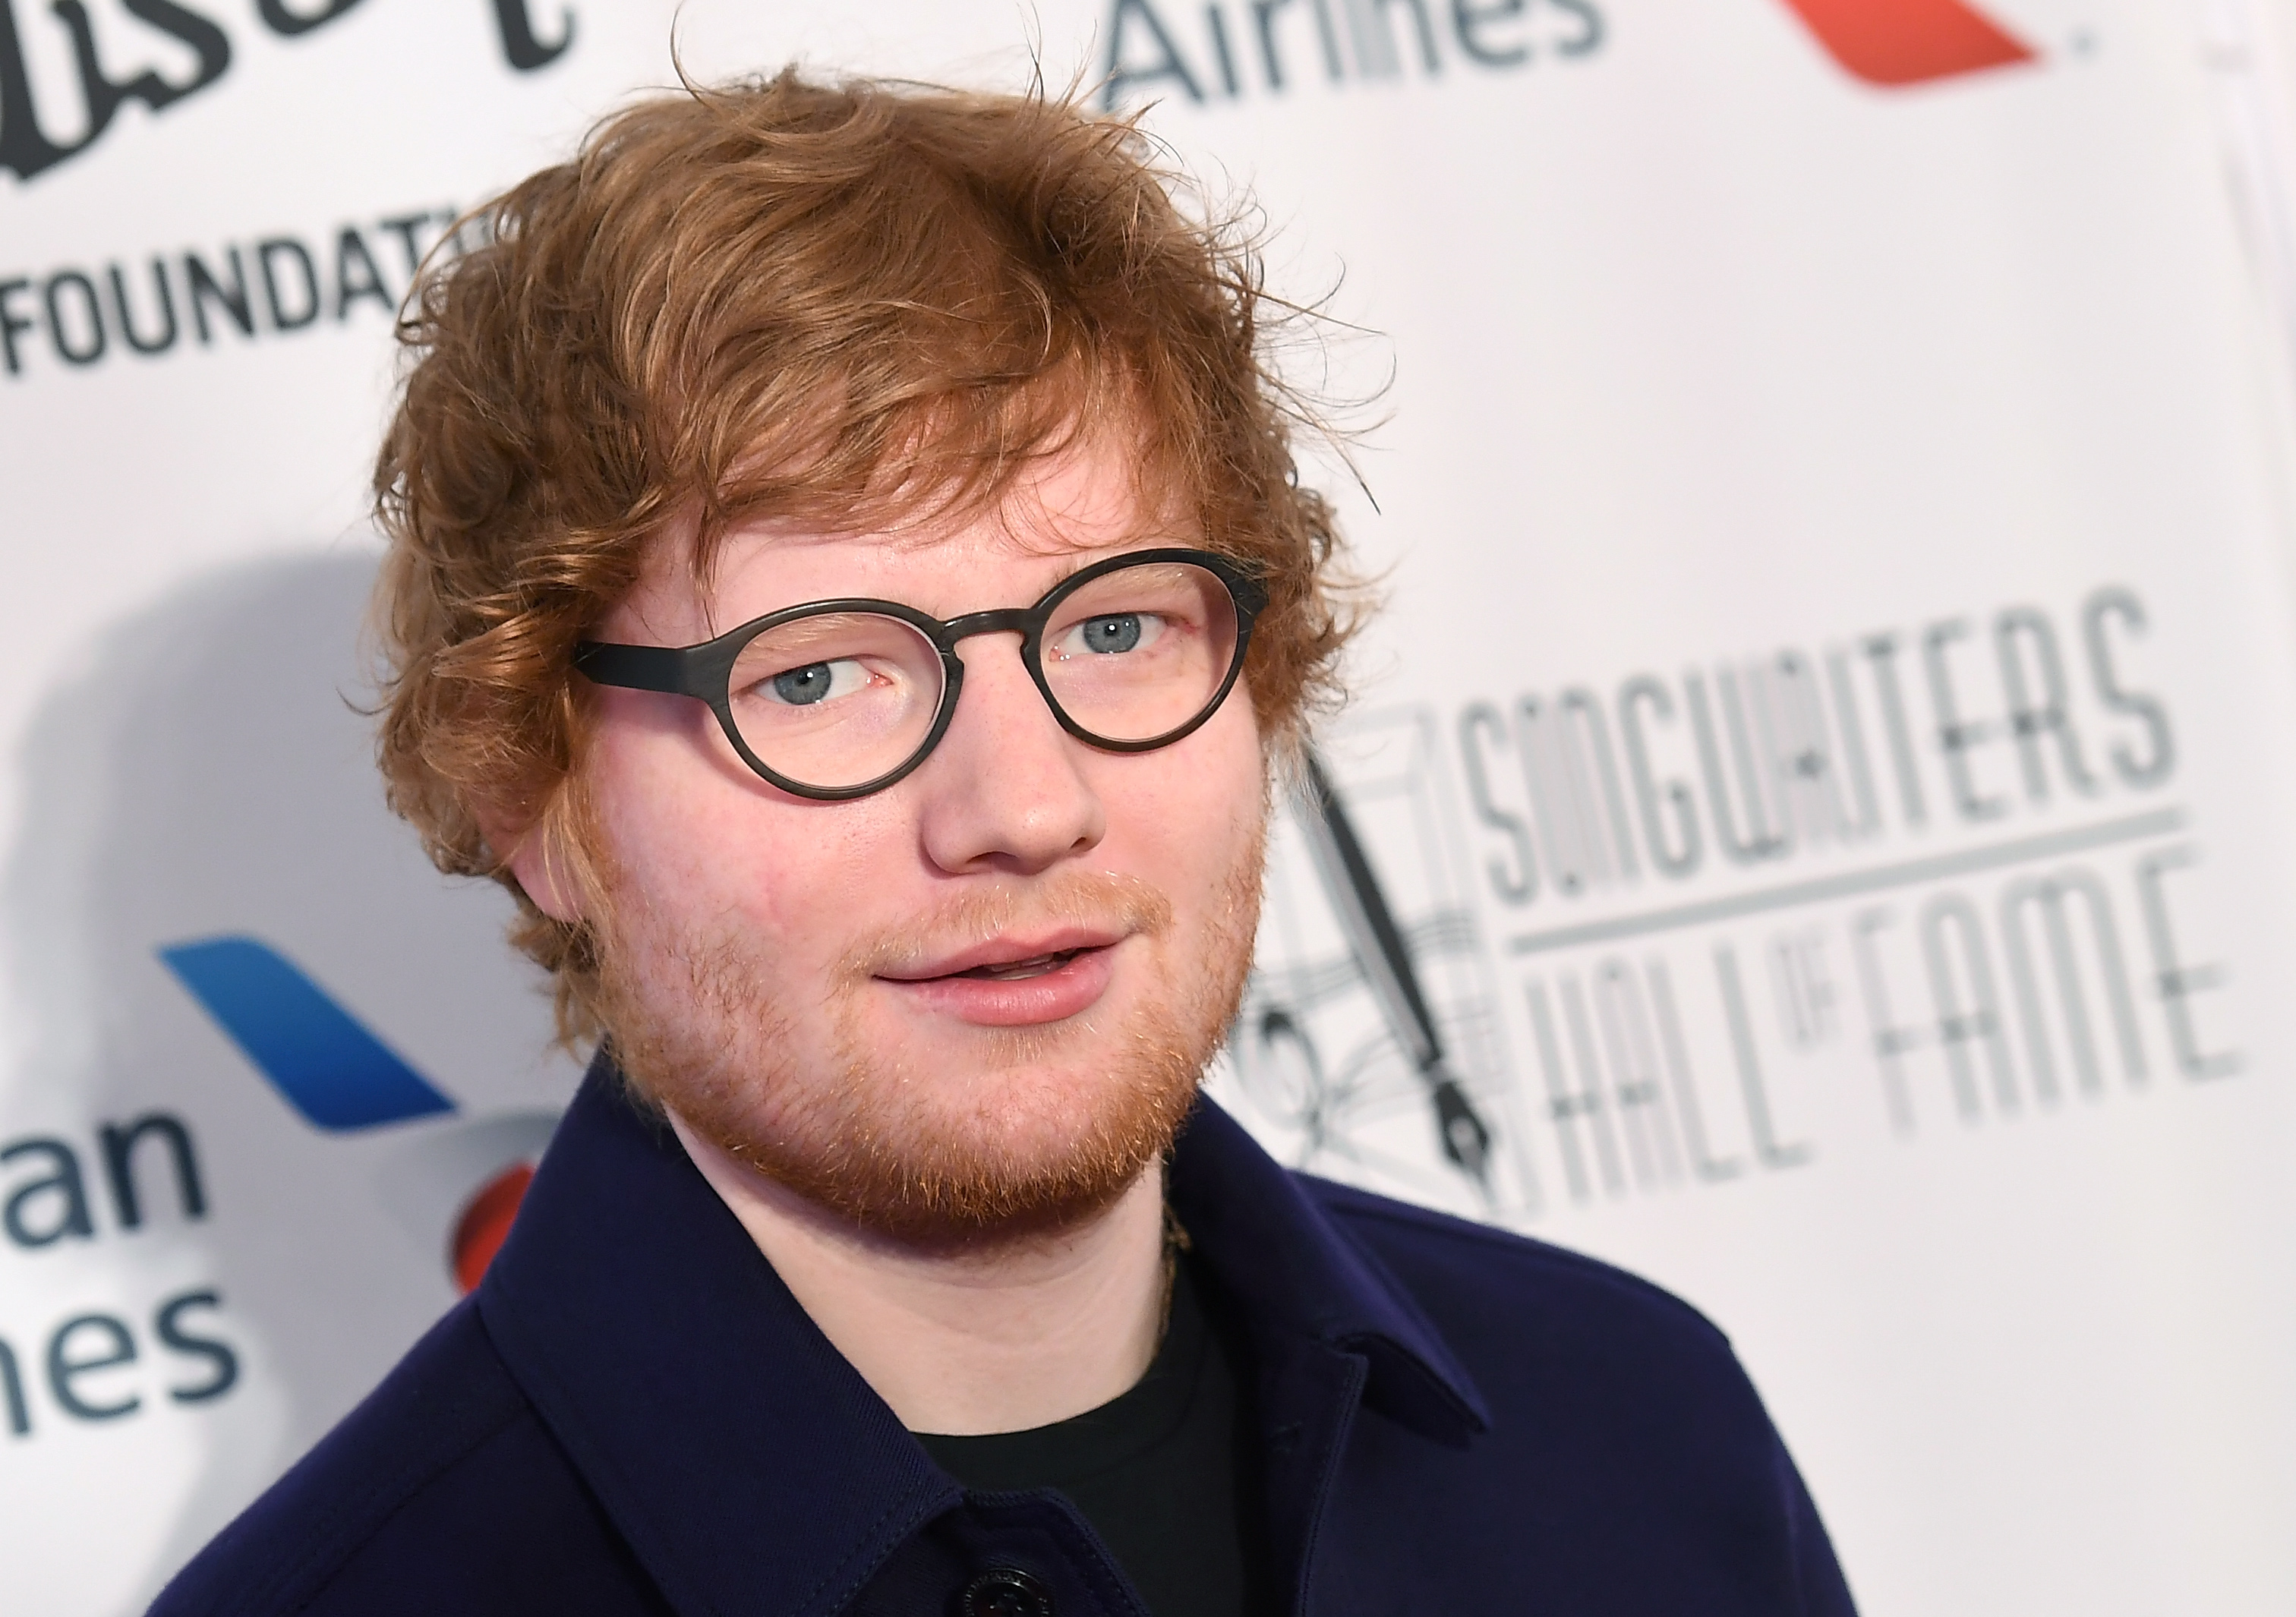 Ed Sheeran at the Songwriters Hall Of Fame